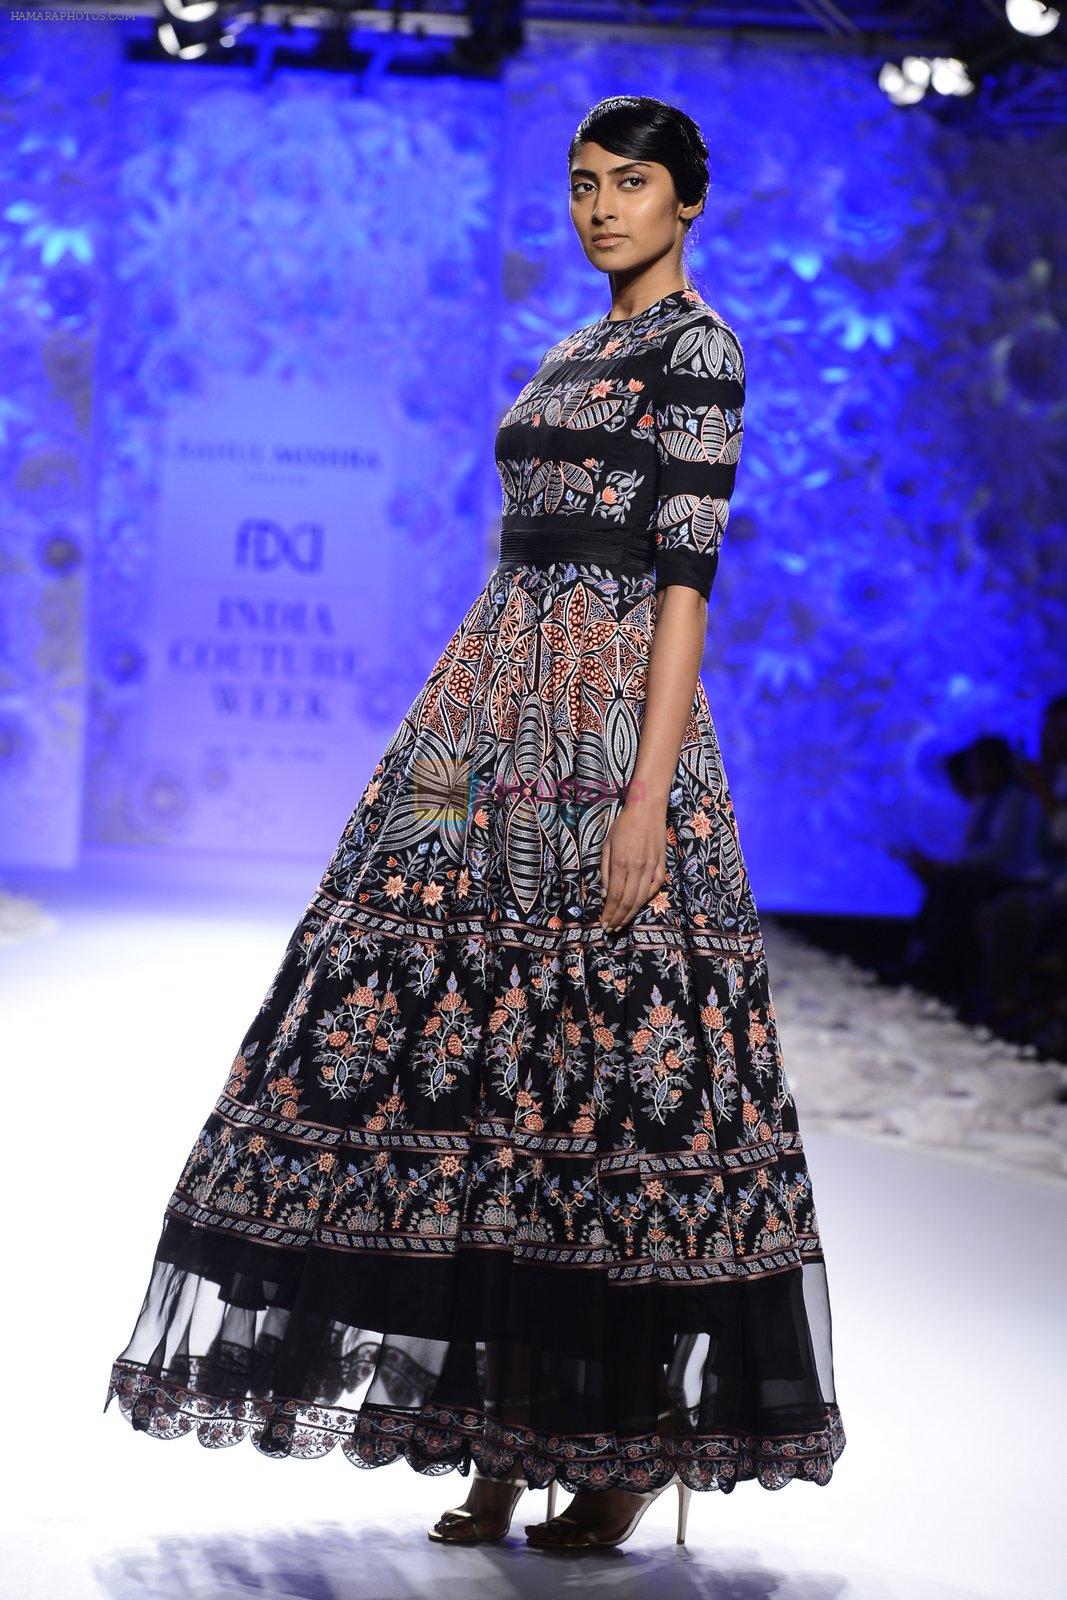 Rahul Mishra showcases Monsoon Diaries at the FDCI India Couture Week 2016 in Taj Palace on 22 July 2016